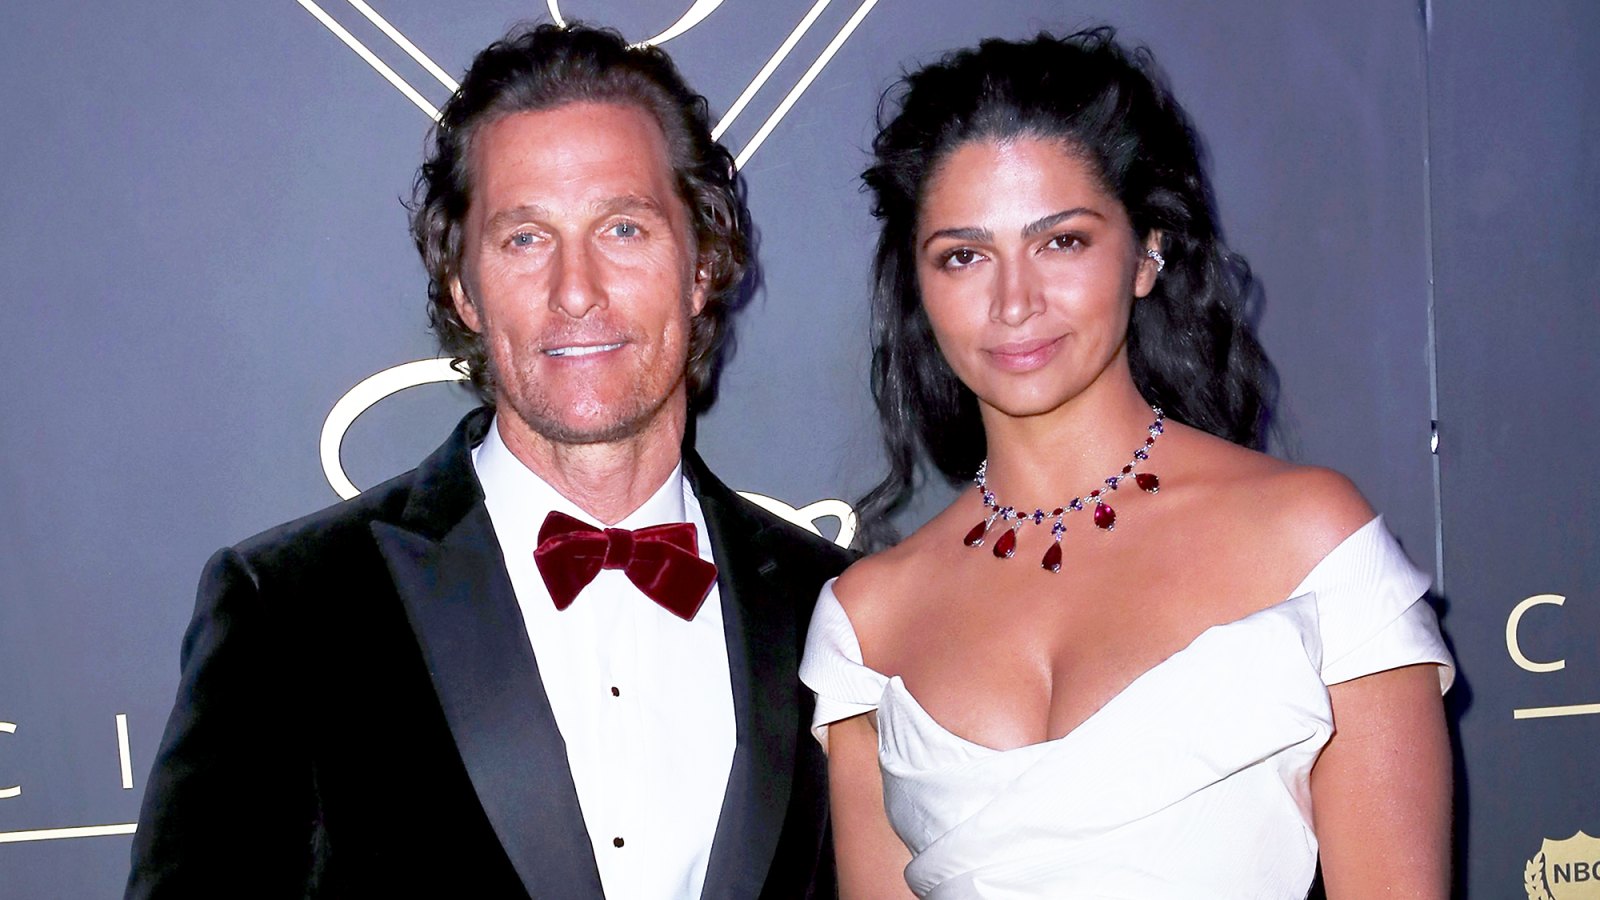 Matthew McConaughey and wife Camila Alves attend the City Gala 2018 at Universal Studios Hollywood on March 4, 2018 in Universal City, California.